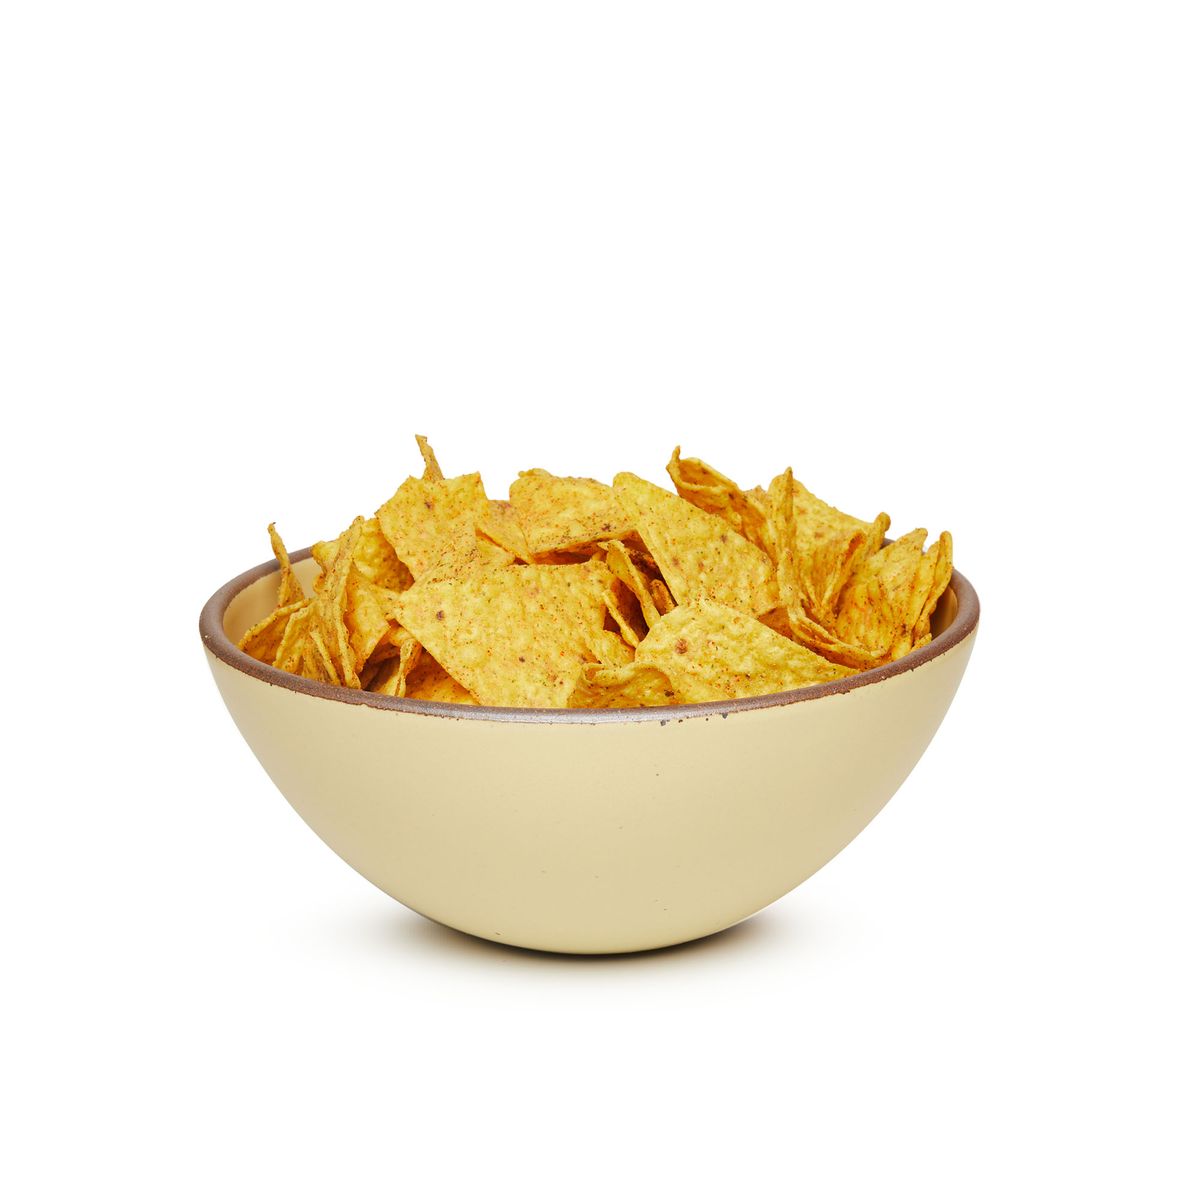 A large rounded ceramic bowl in a light butter yellow color featuring iron speckles and an unglazed rim, filled with tortilla chips